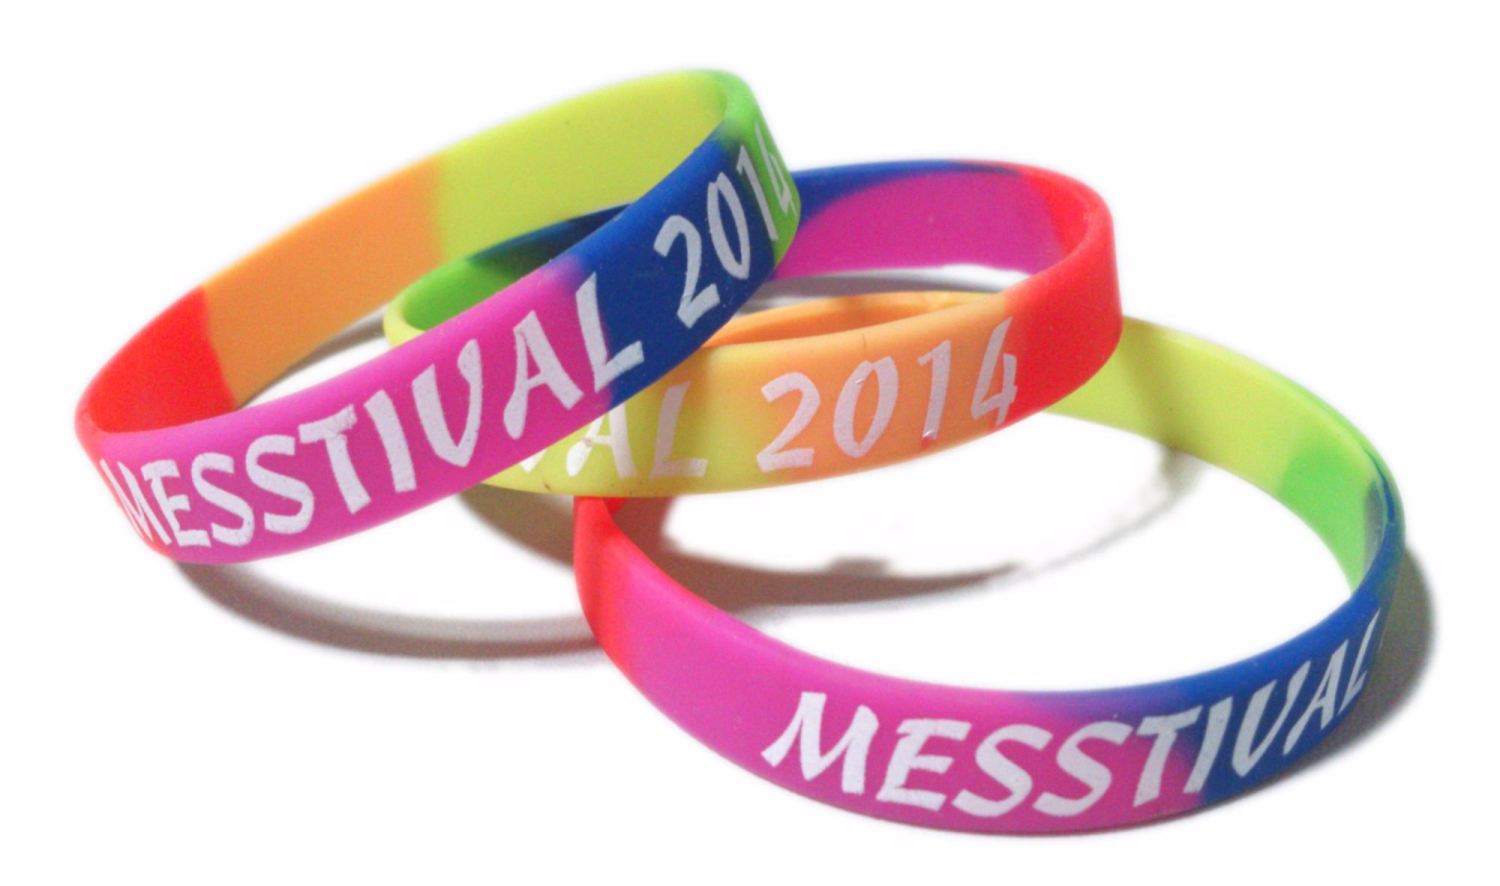 messtival wristbands by www.promo-bands.co.uk